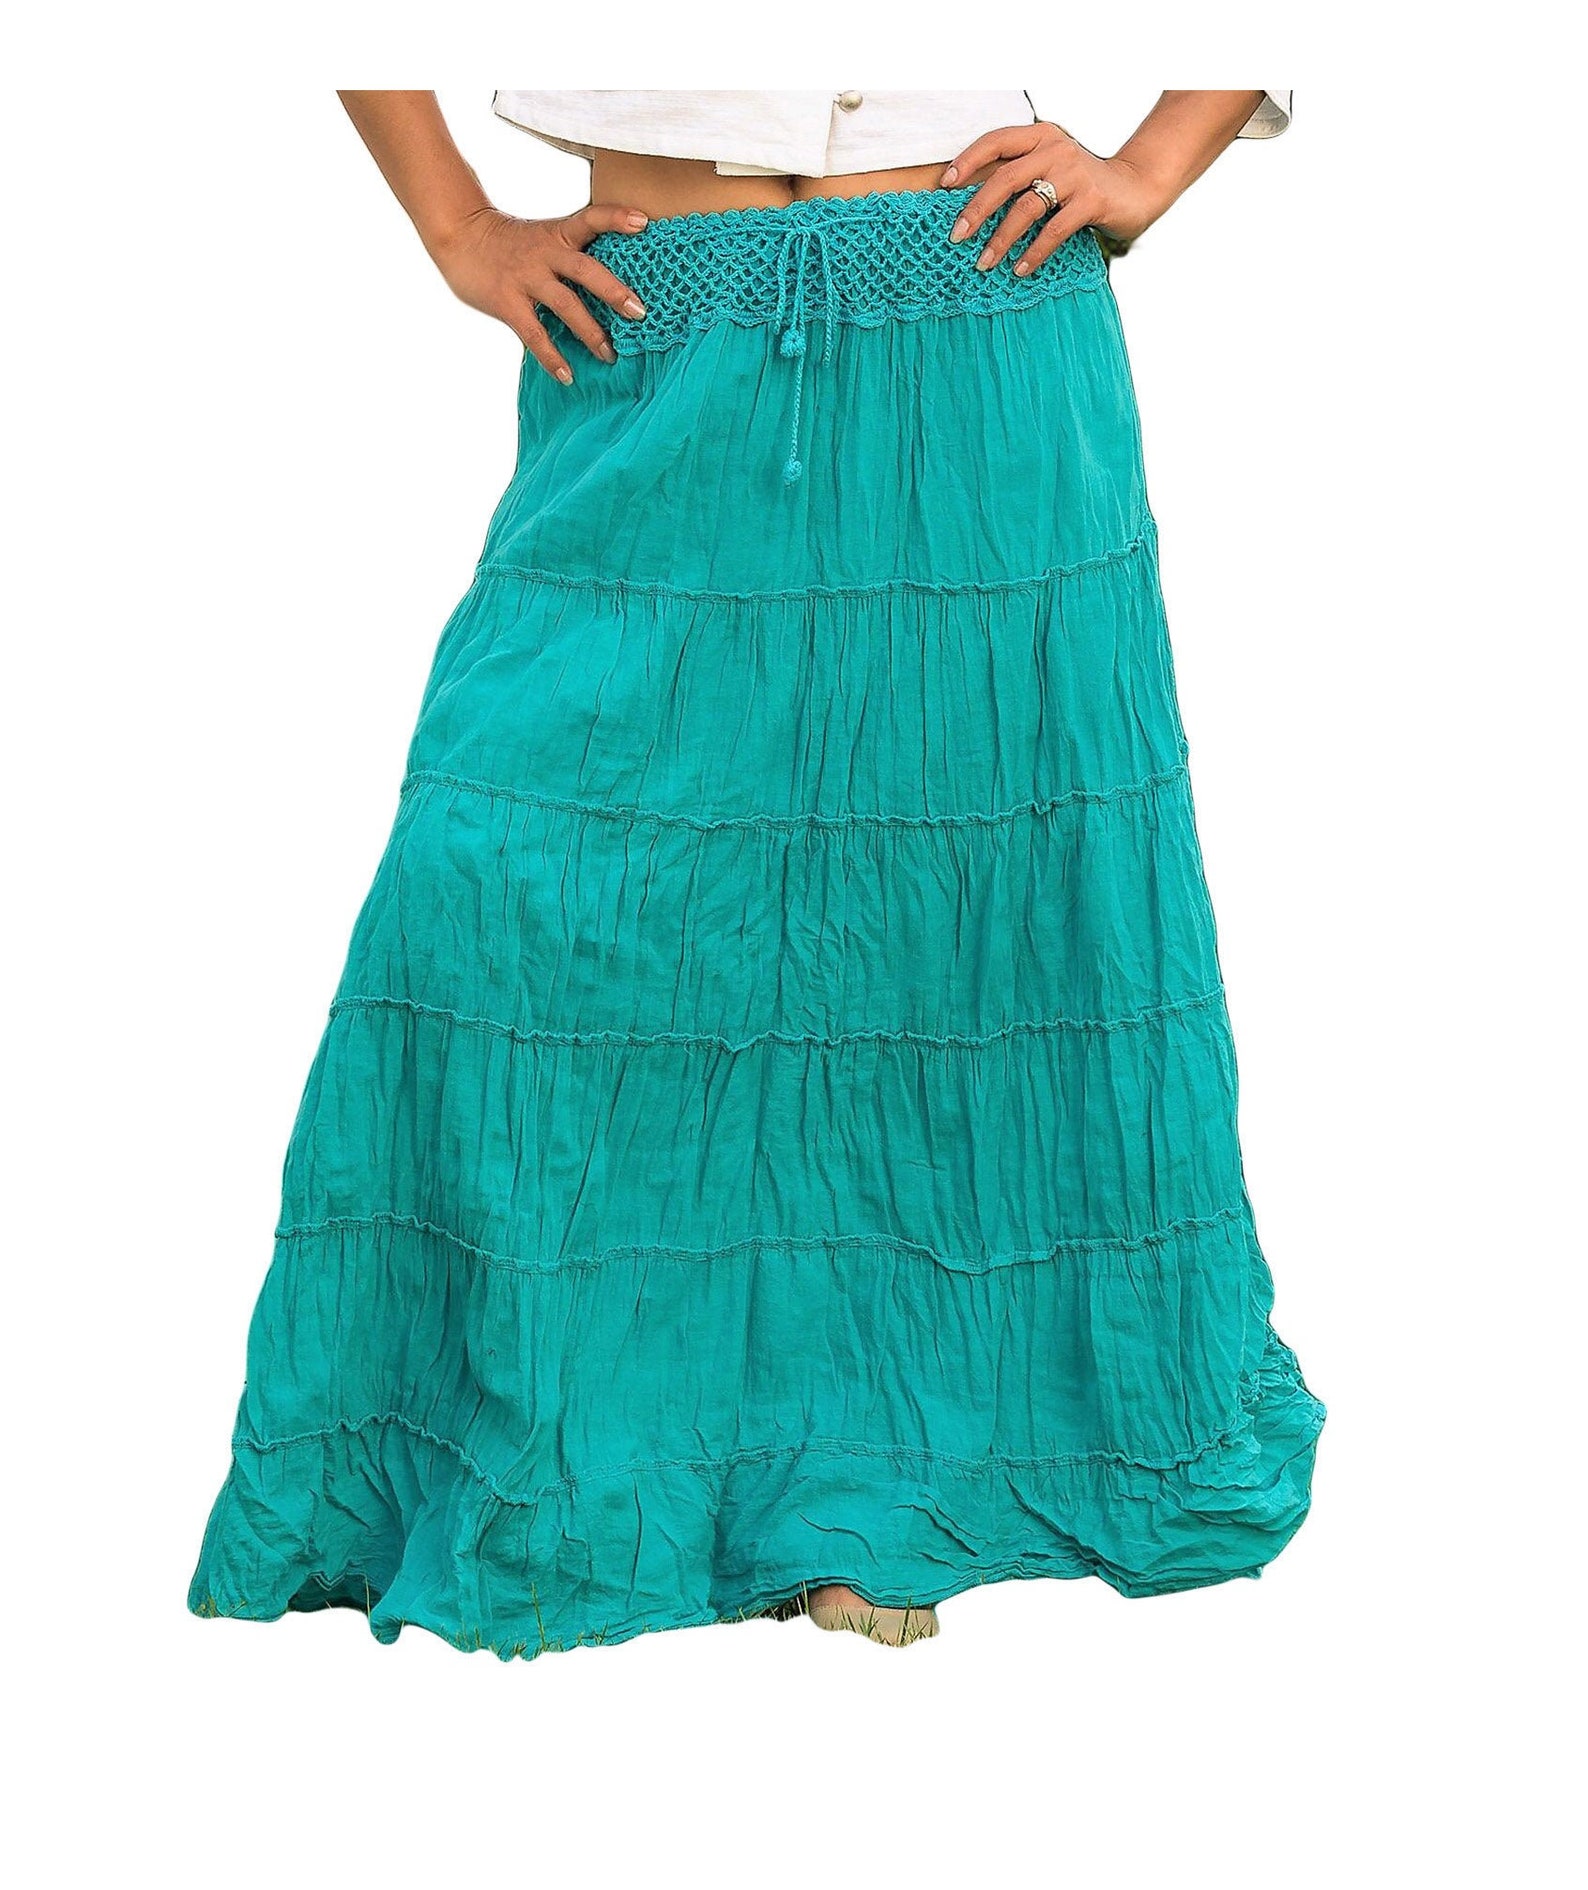 Turquoise Gypsy Skirt Long Cotton Tiered Boho Skirts - Etsy